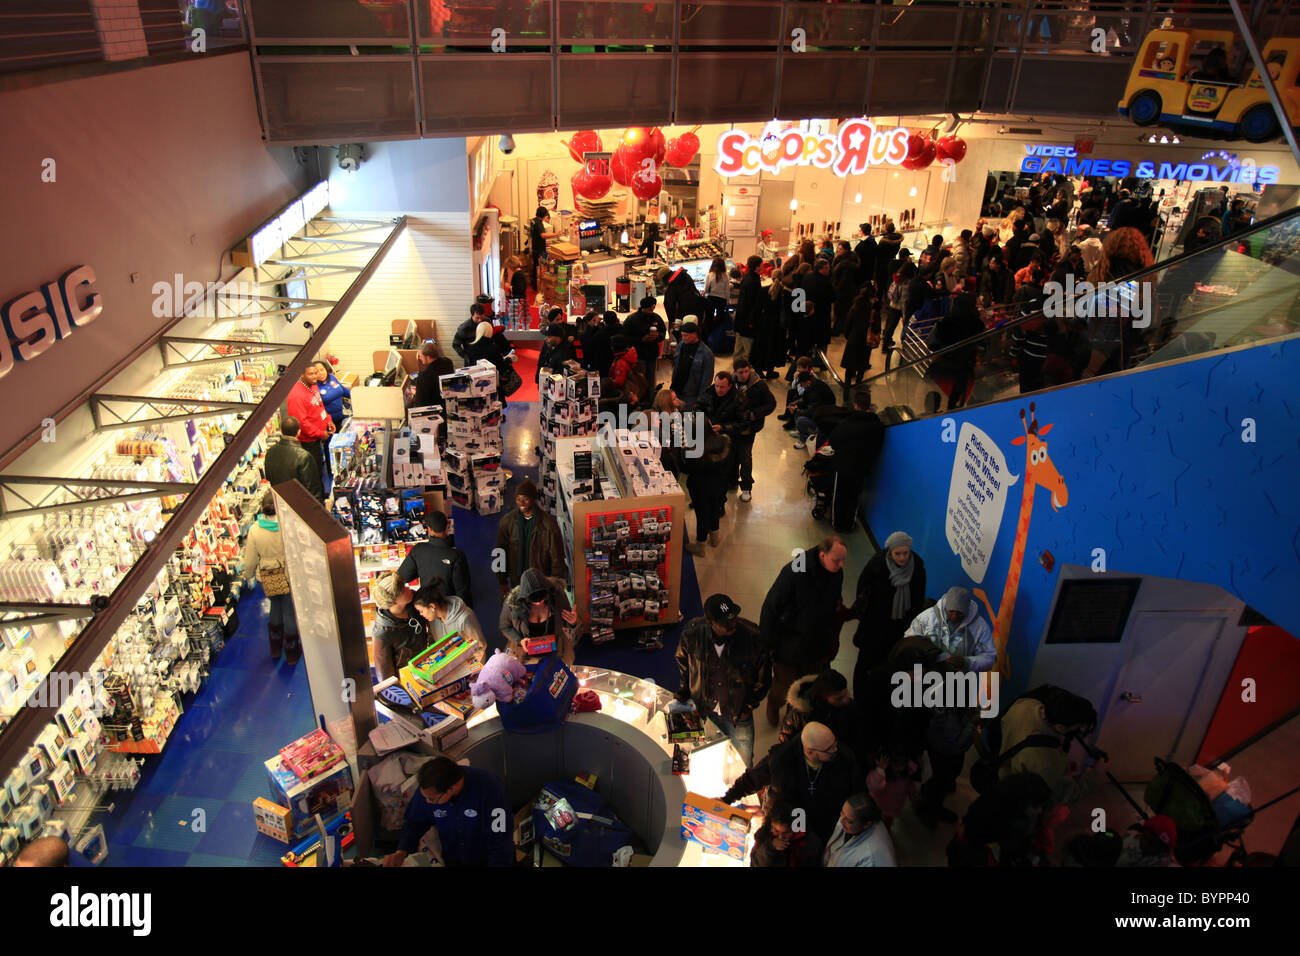 Crowd inside Toys r us store at Times square New York for Christmas sales city 2010 Stock Photo